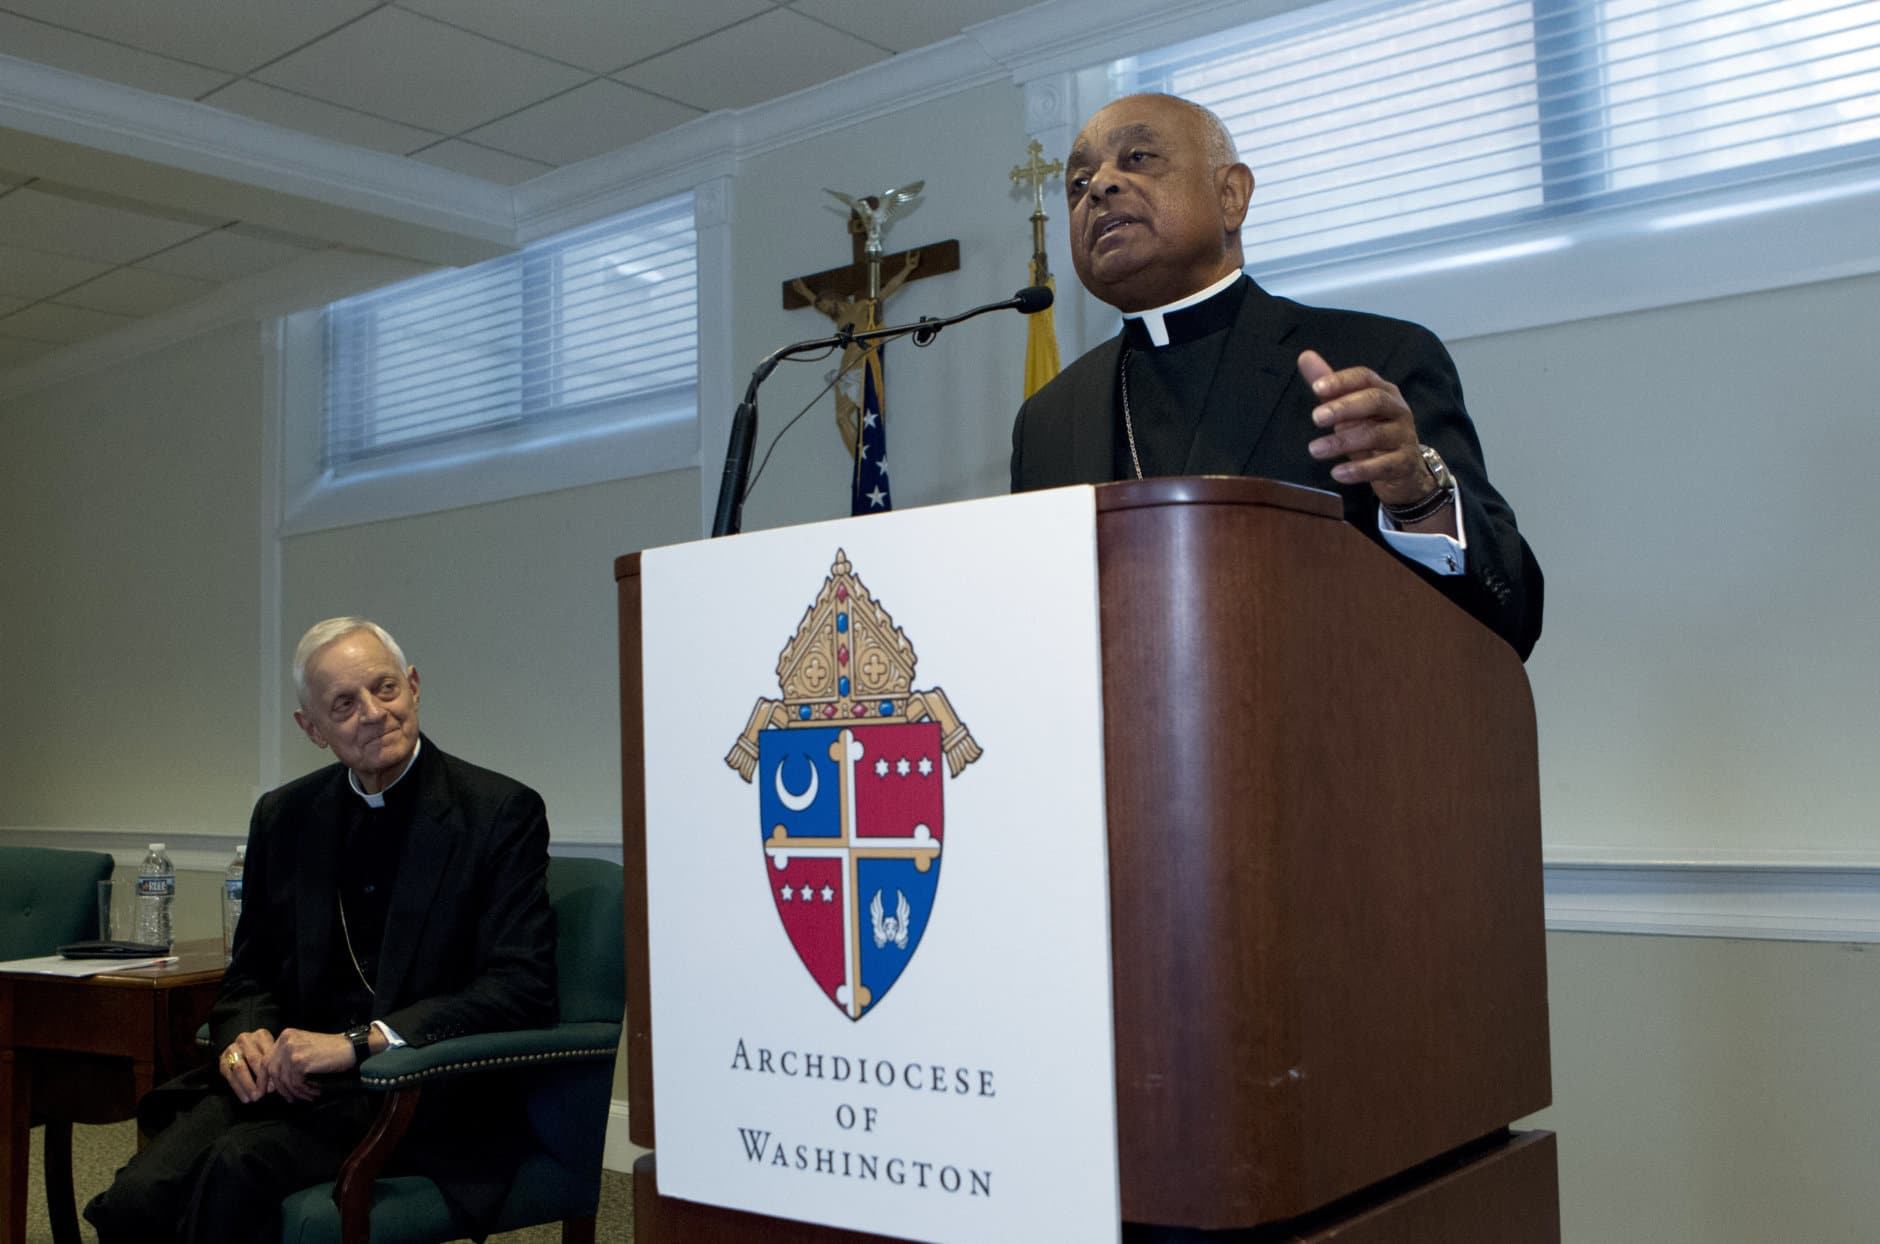 Archbishop designated by Pope Francis to the Archdiocese of Washington, Archbishop Wilton D. Gregory, speaks during a news conference as Cardinal Donald Wuerl looks on, at Washington Archdiocesan Pastoral Center in Hyattsville, Md., Thursday, April 4, 2019. Archbishop-designate Gregory will succeed Cardinal Donald Wuerl. (AP Photo/Jose Luis Magana)